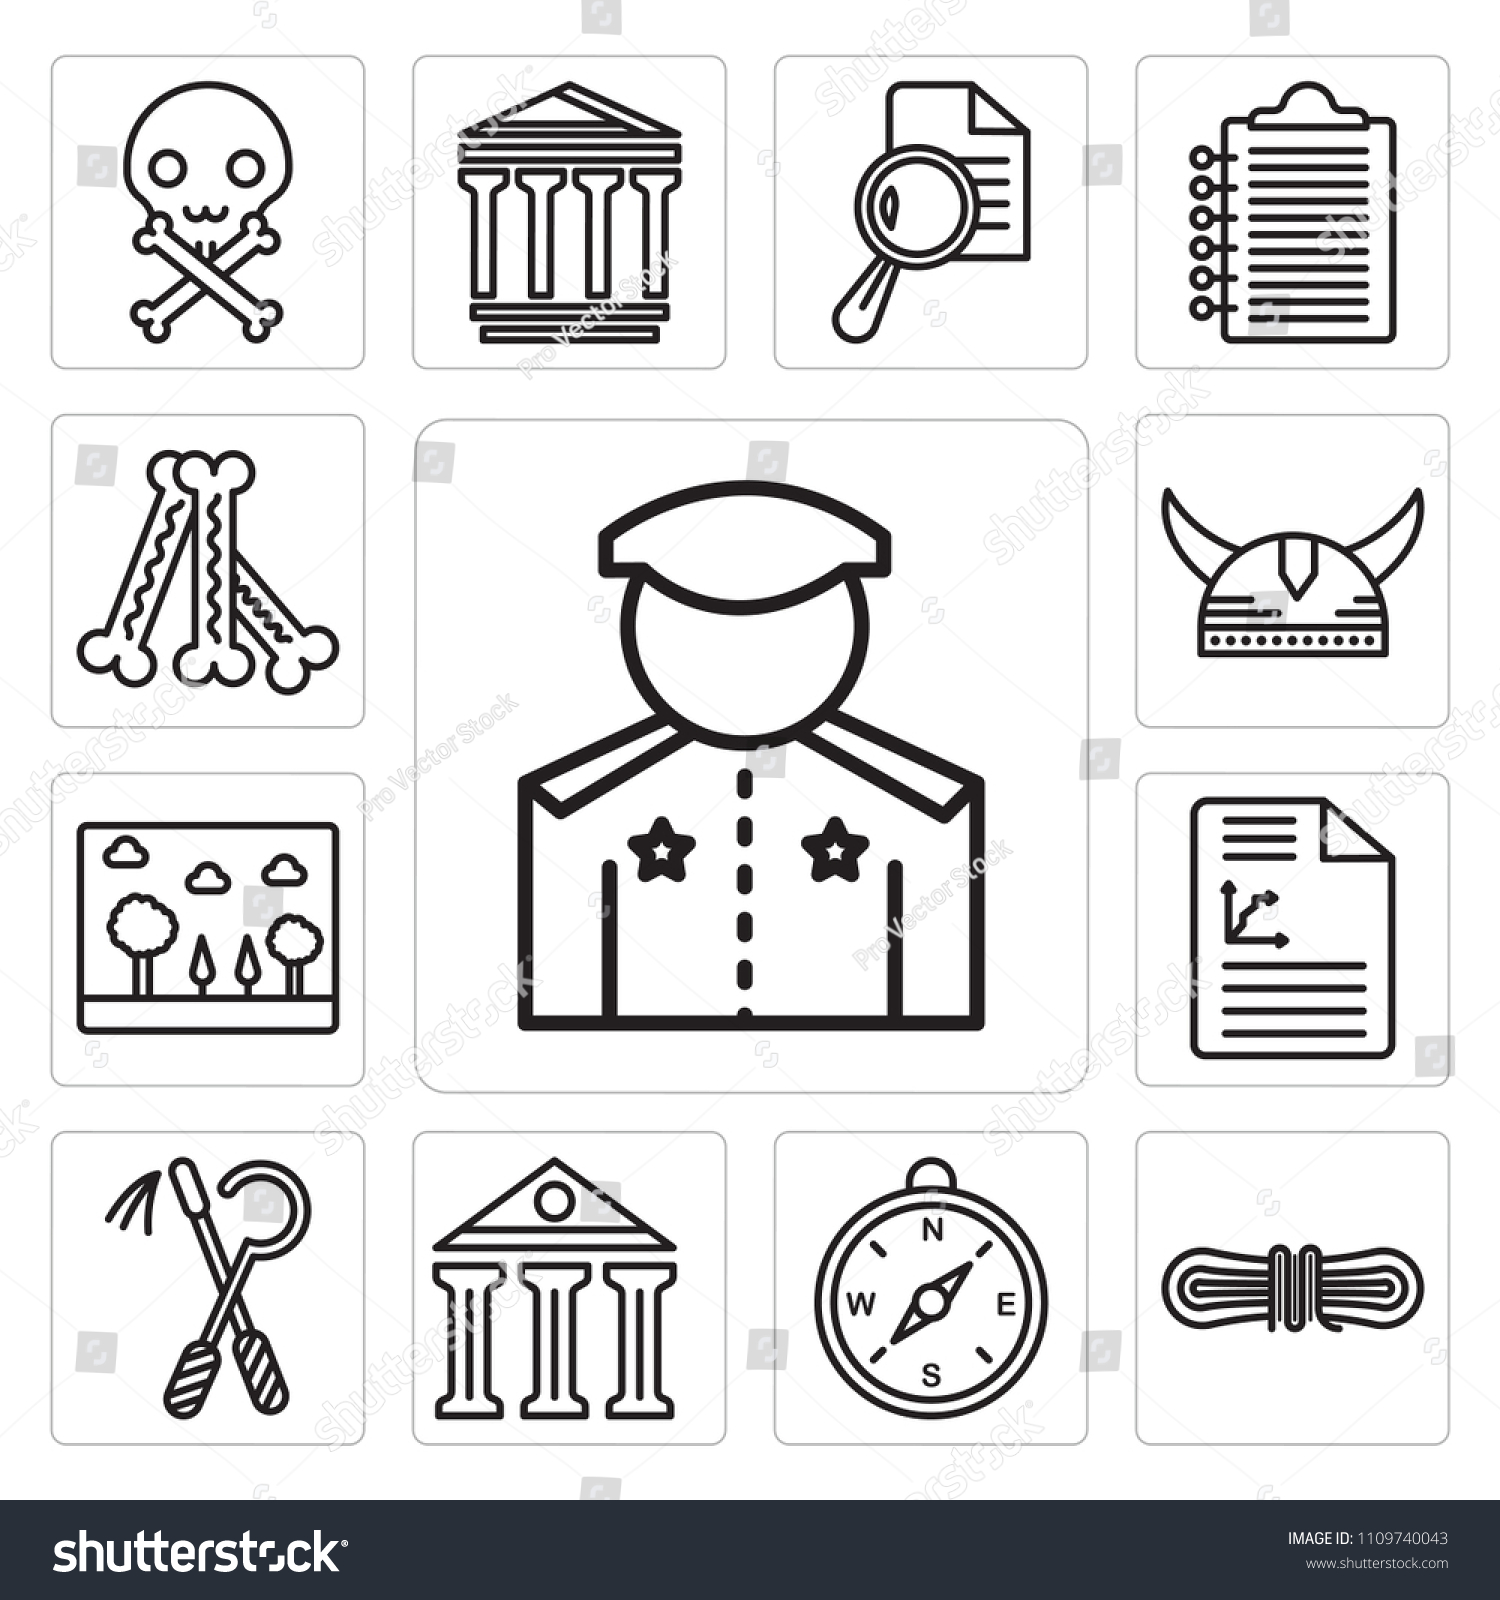 stock-vector-set-of-simple-editable-icons-such-as-policeman-rope-compass-columns-egypt-report-picture-1109740043.jpg